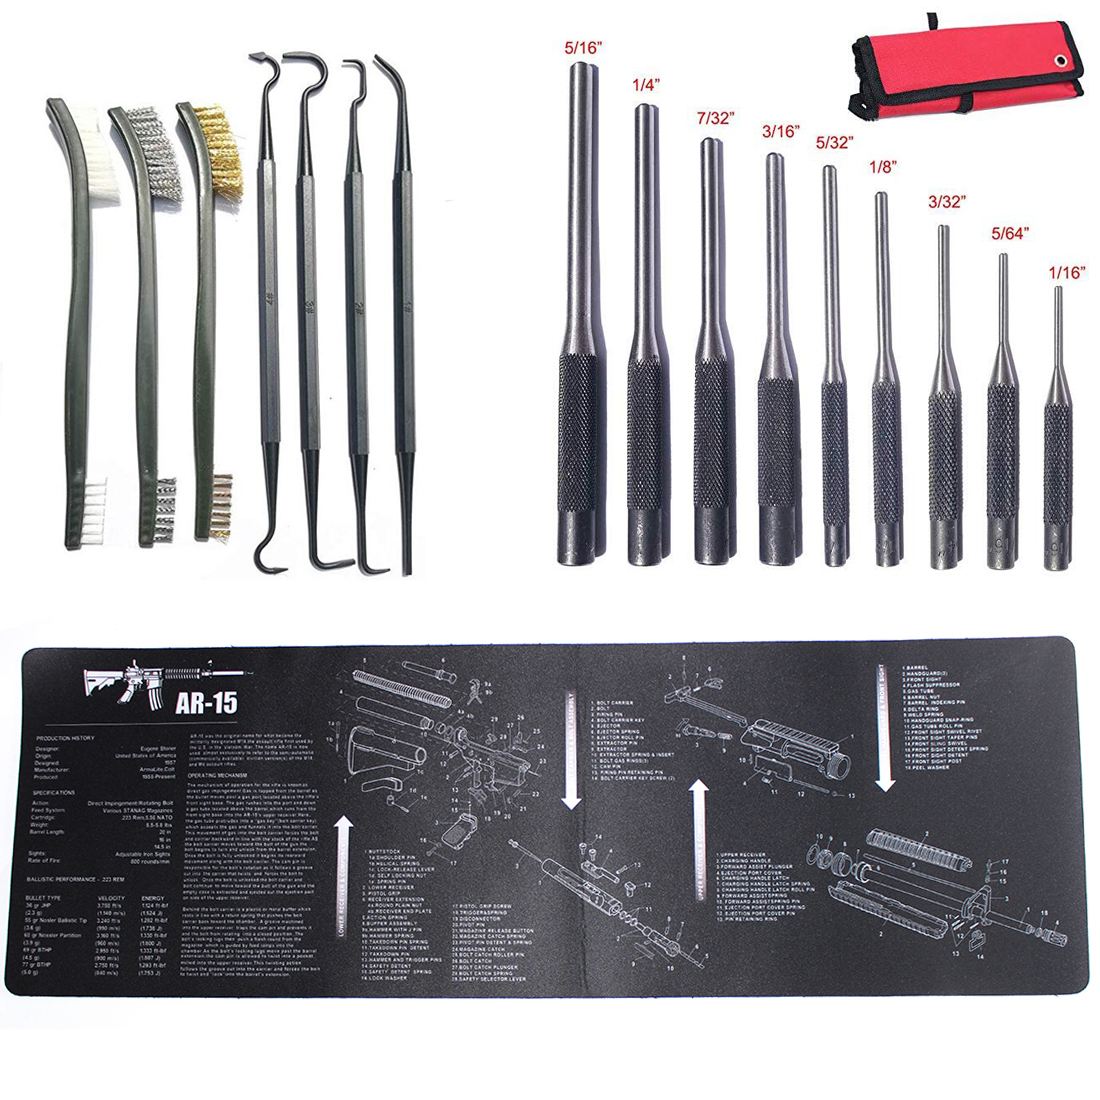 Gun Cleaning Mat with Double Ended Cleaning Brushes Roll Pin Punch Gunsmithing Tools AR15 Workbench Mat with Parts Diagram 36"